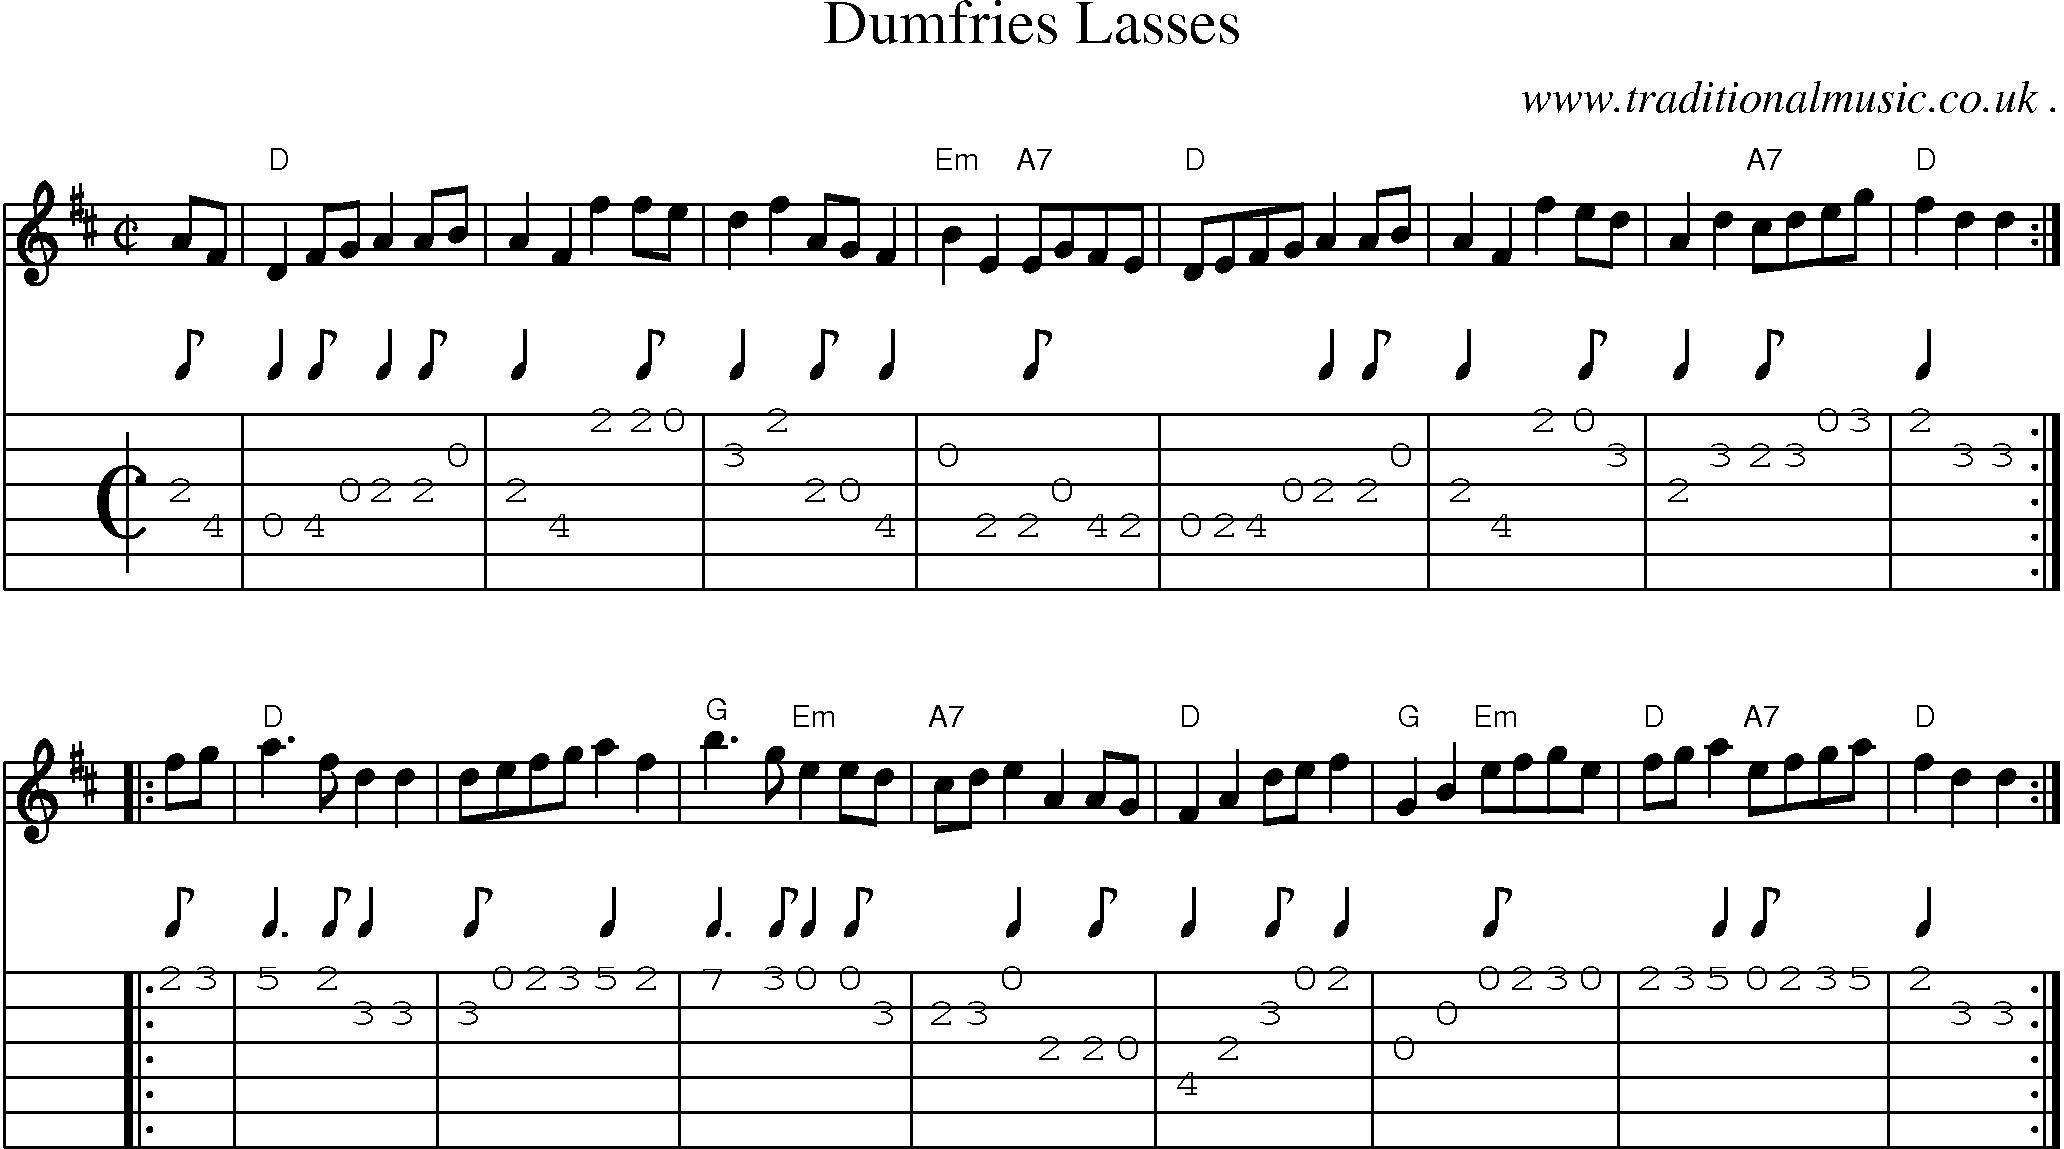 Sheet-music  score, Chords and Guitar Tabs for Dumfries Lasses